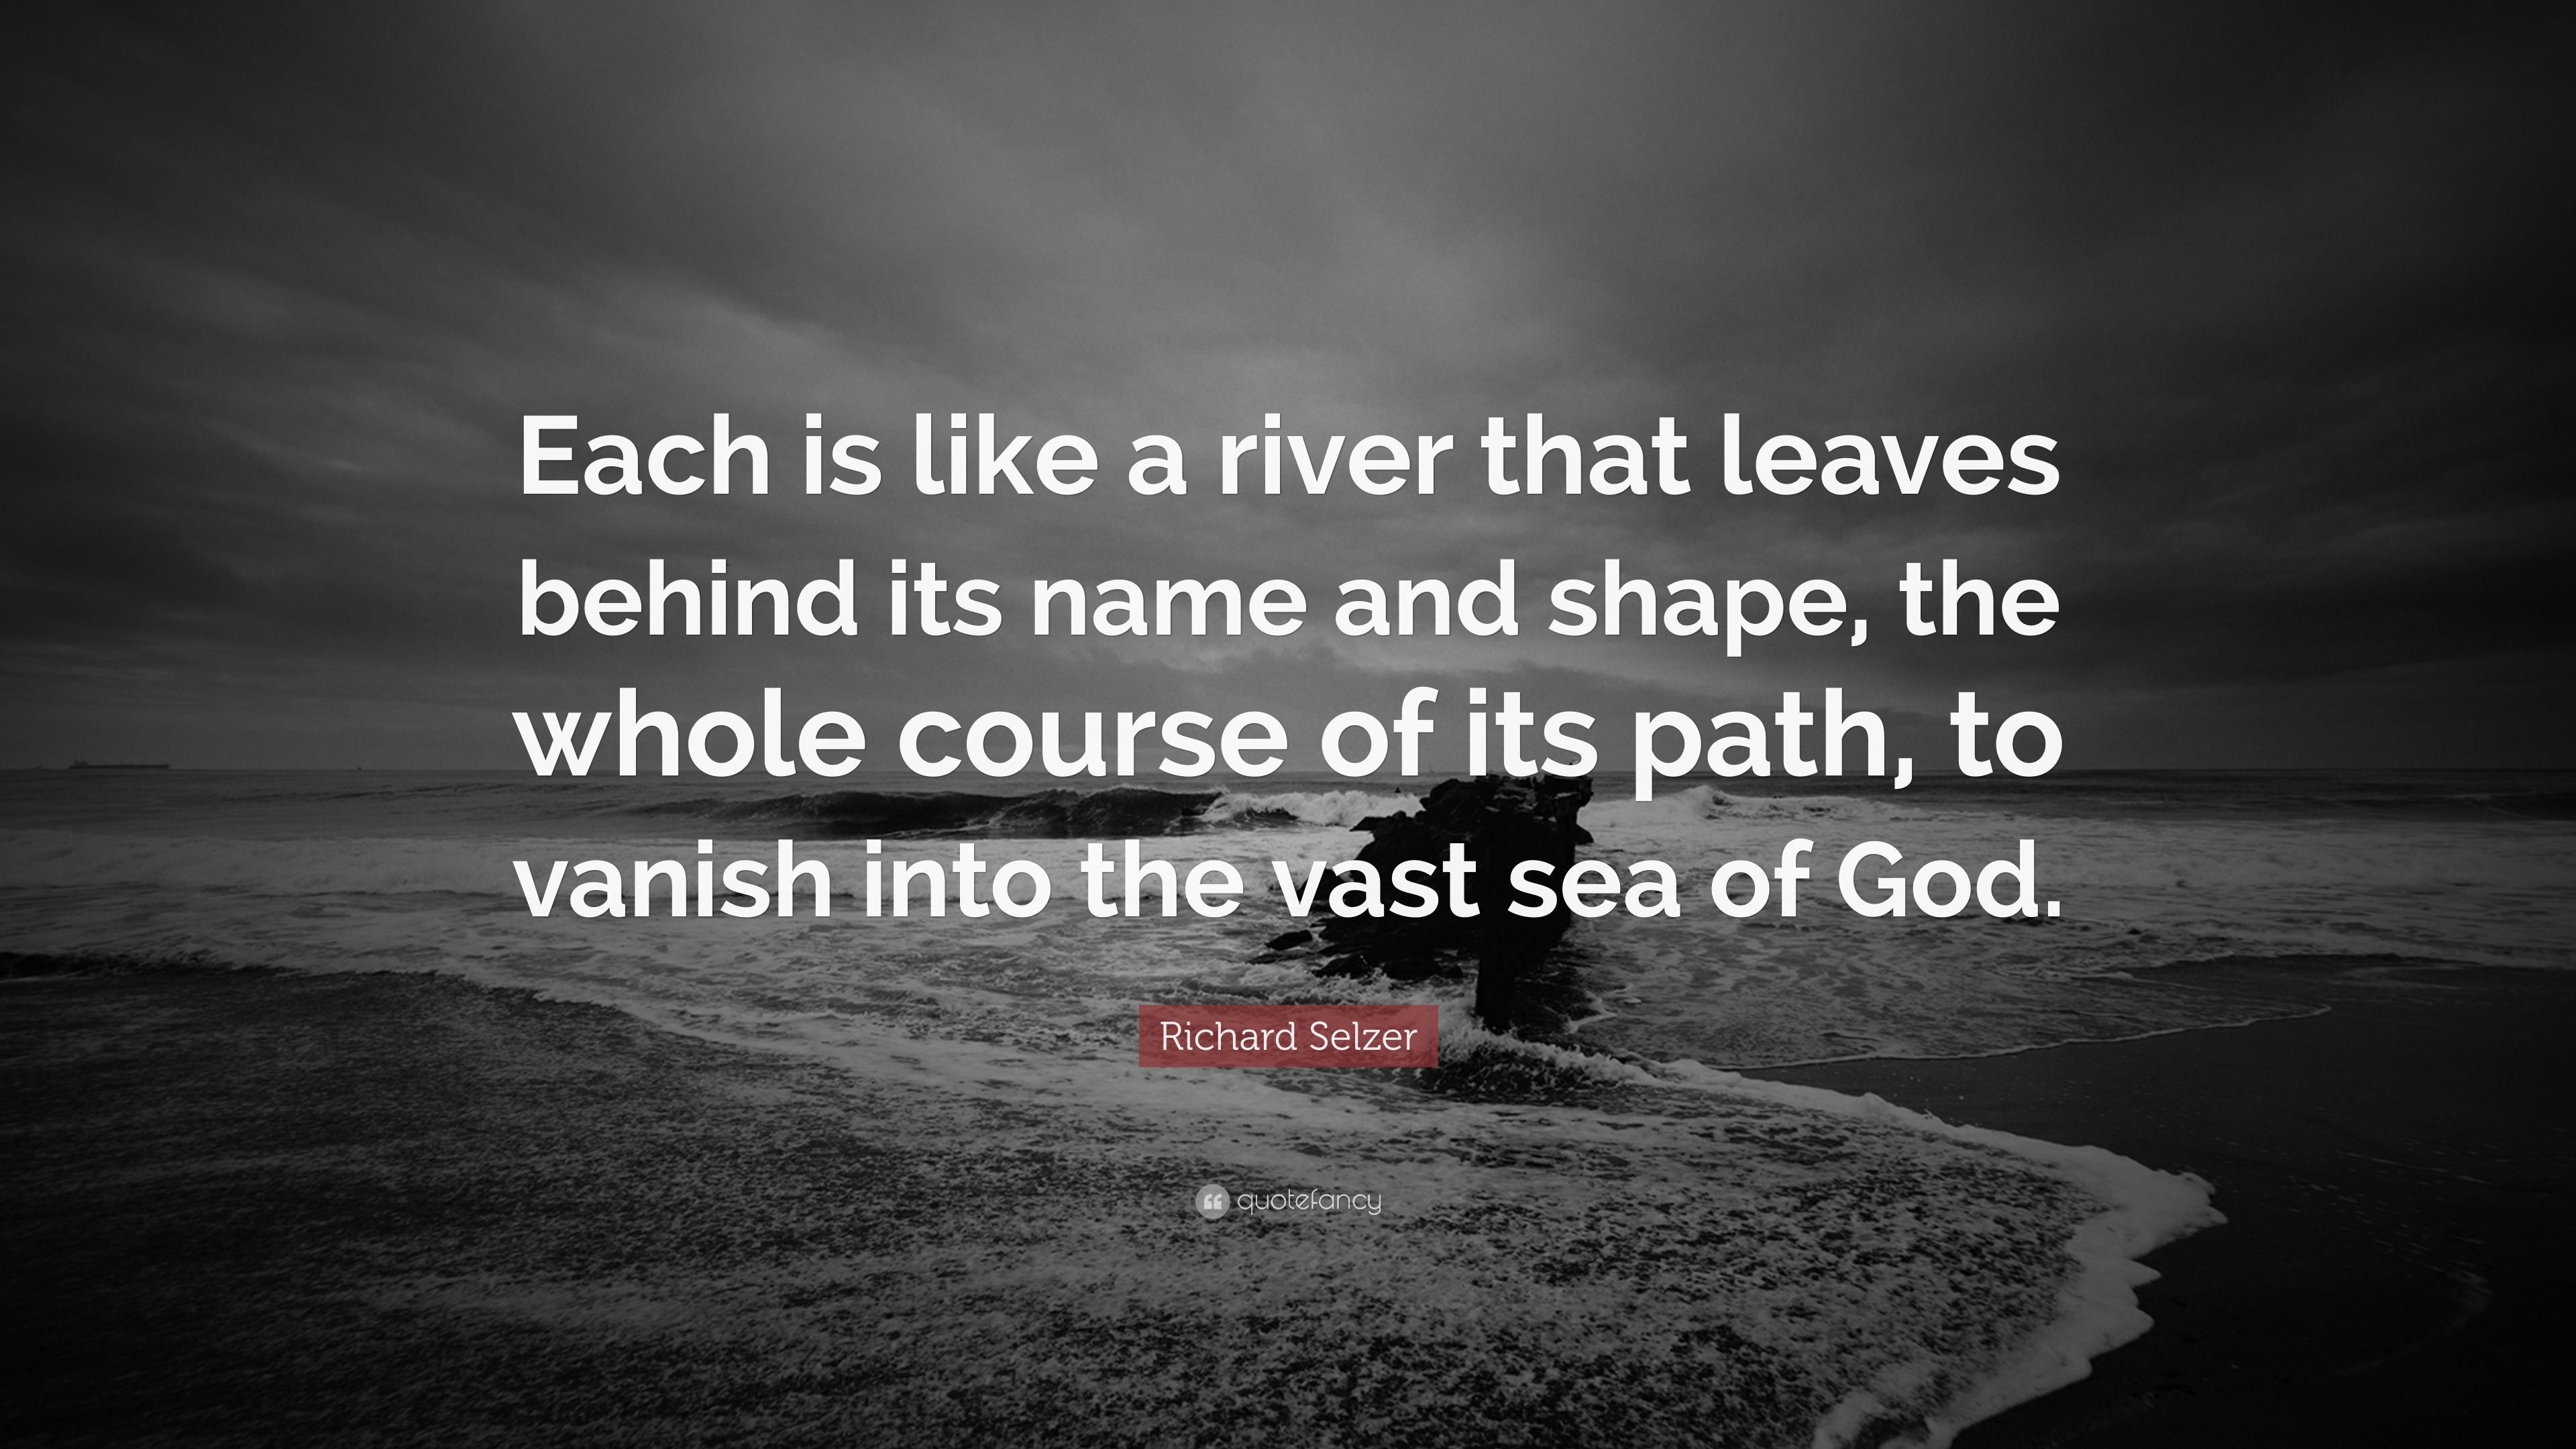 Richard Selzer Quote “Each is like a river that leaves behind its name and